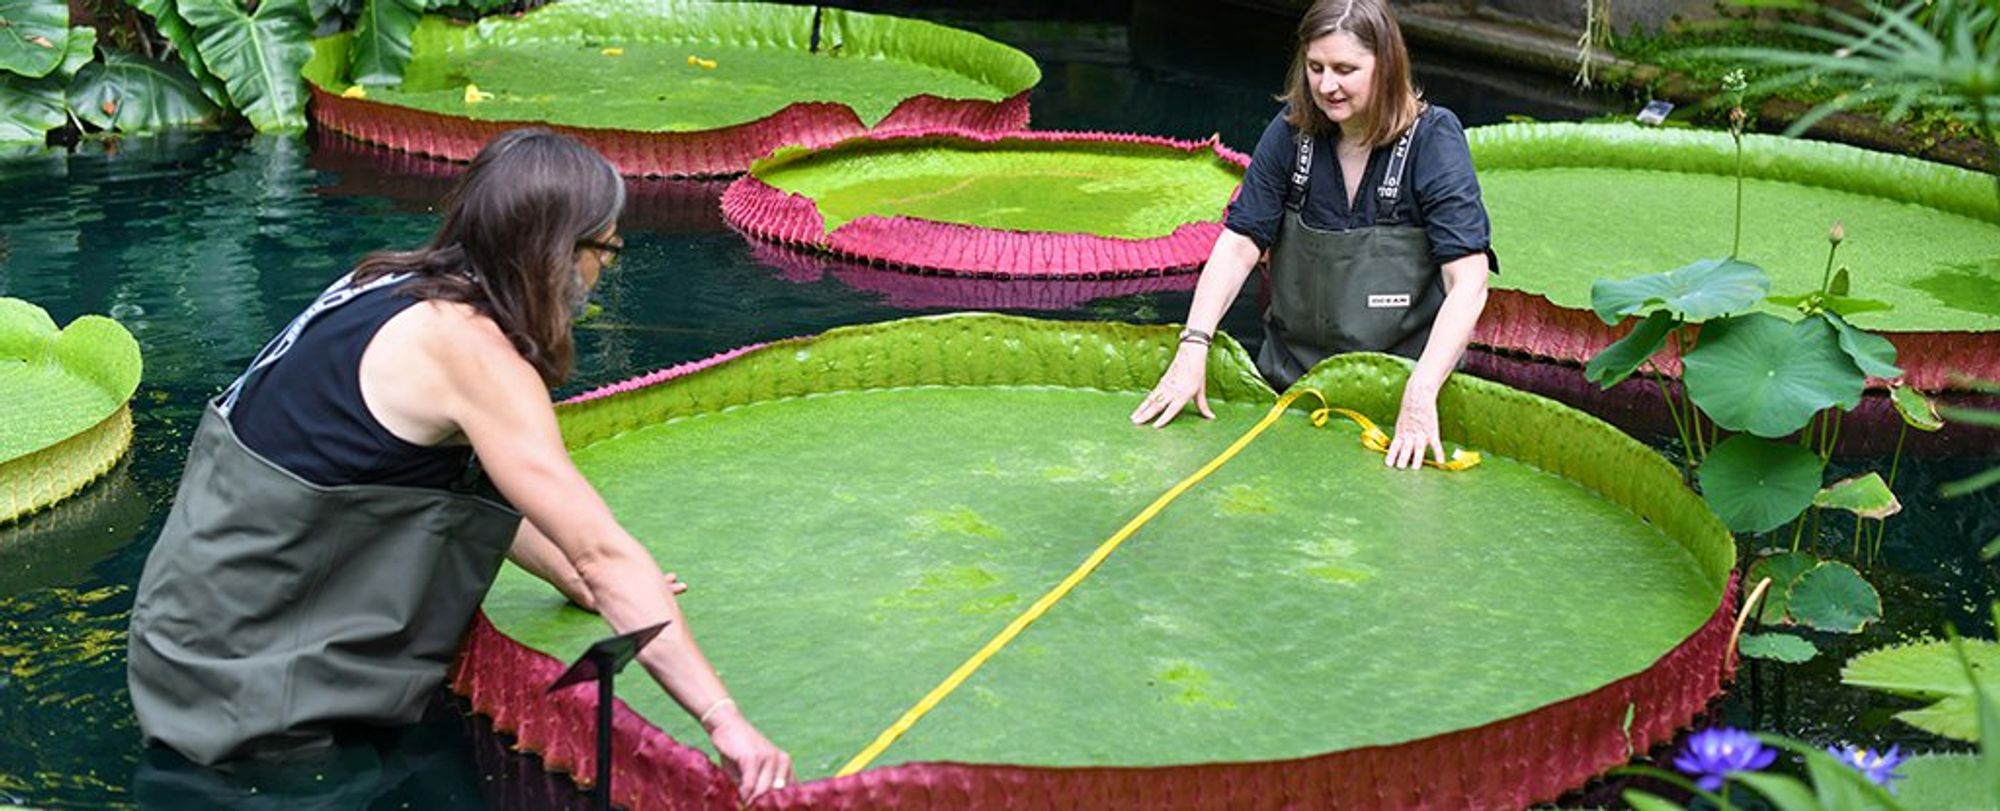 A New Species of Absolutely Enormous Waterlily Has Been Hiding in Plain Sight